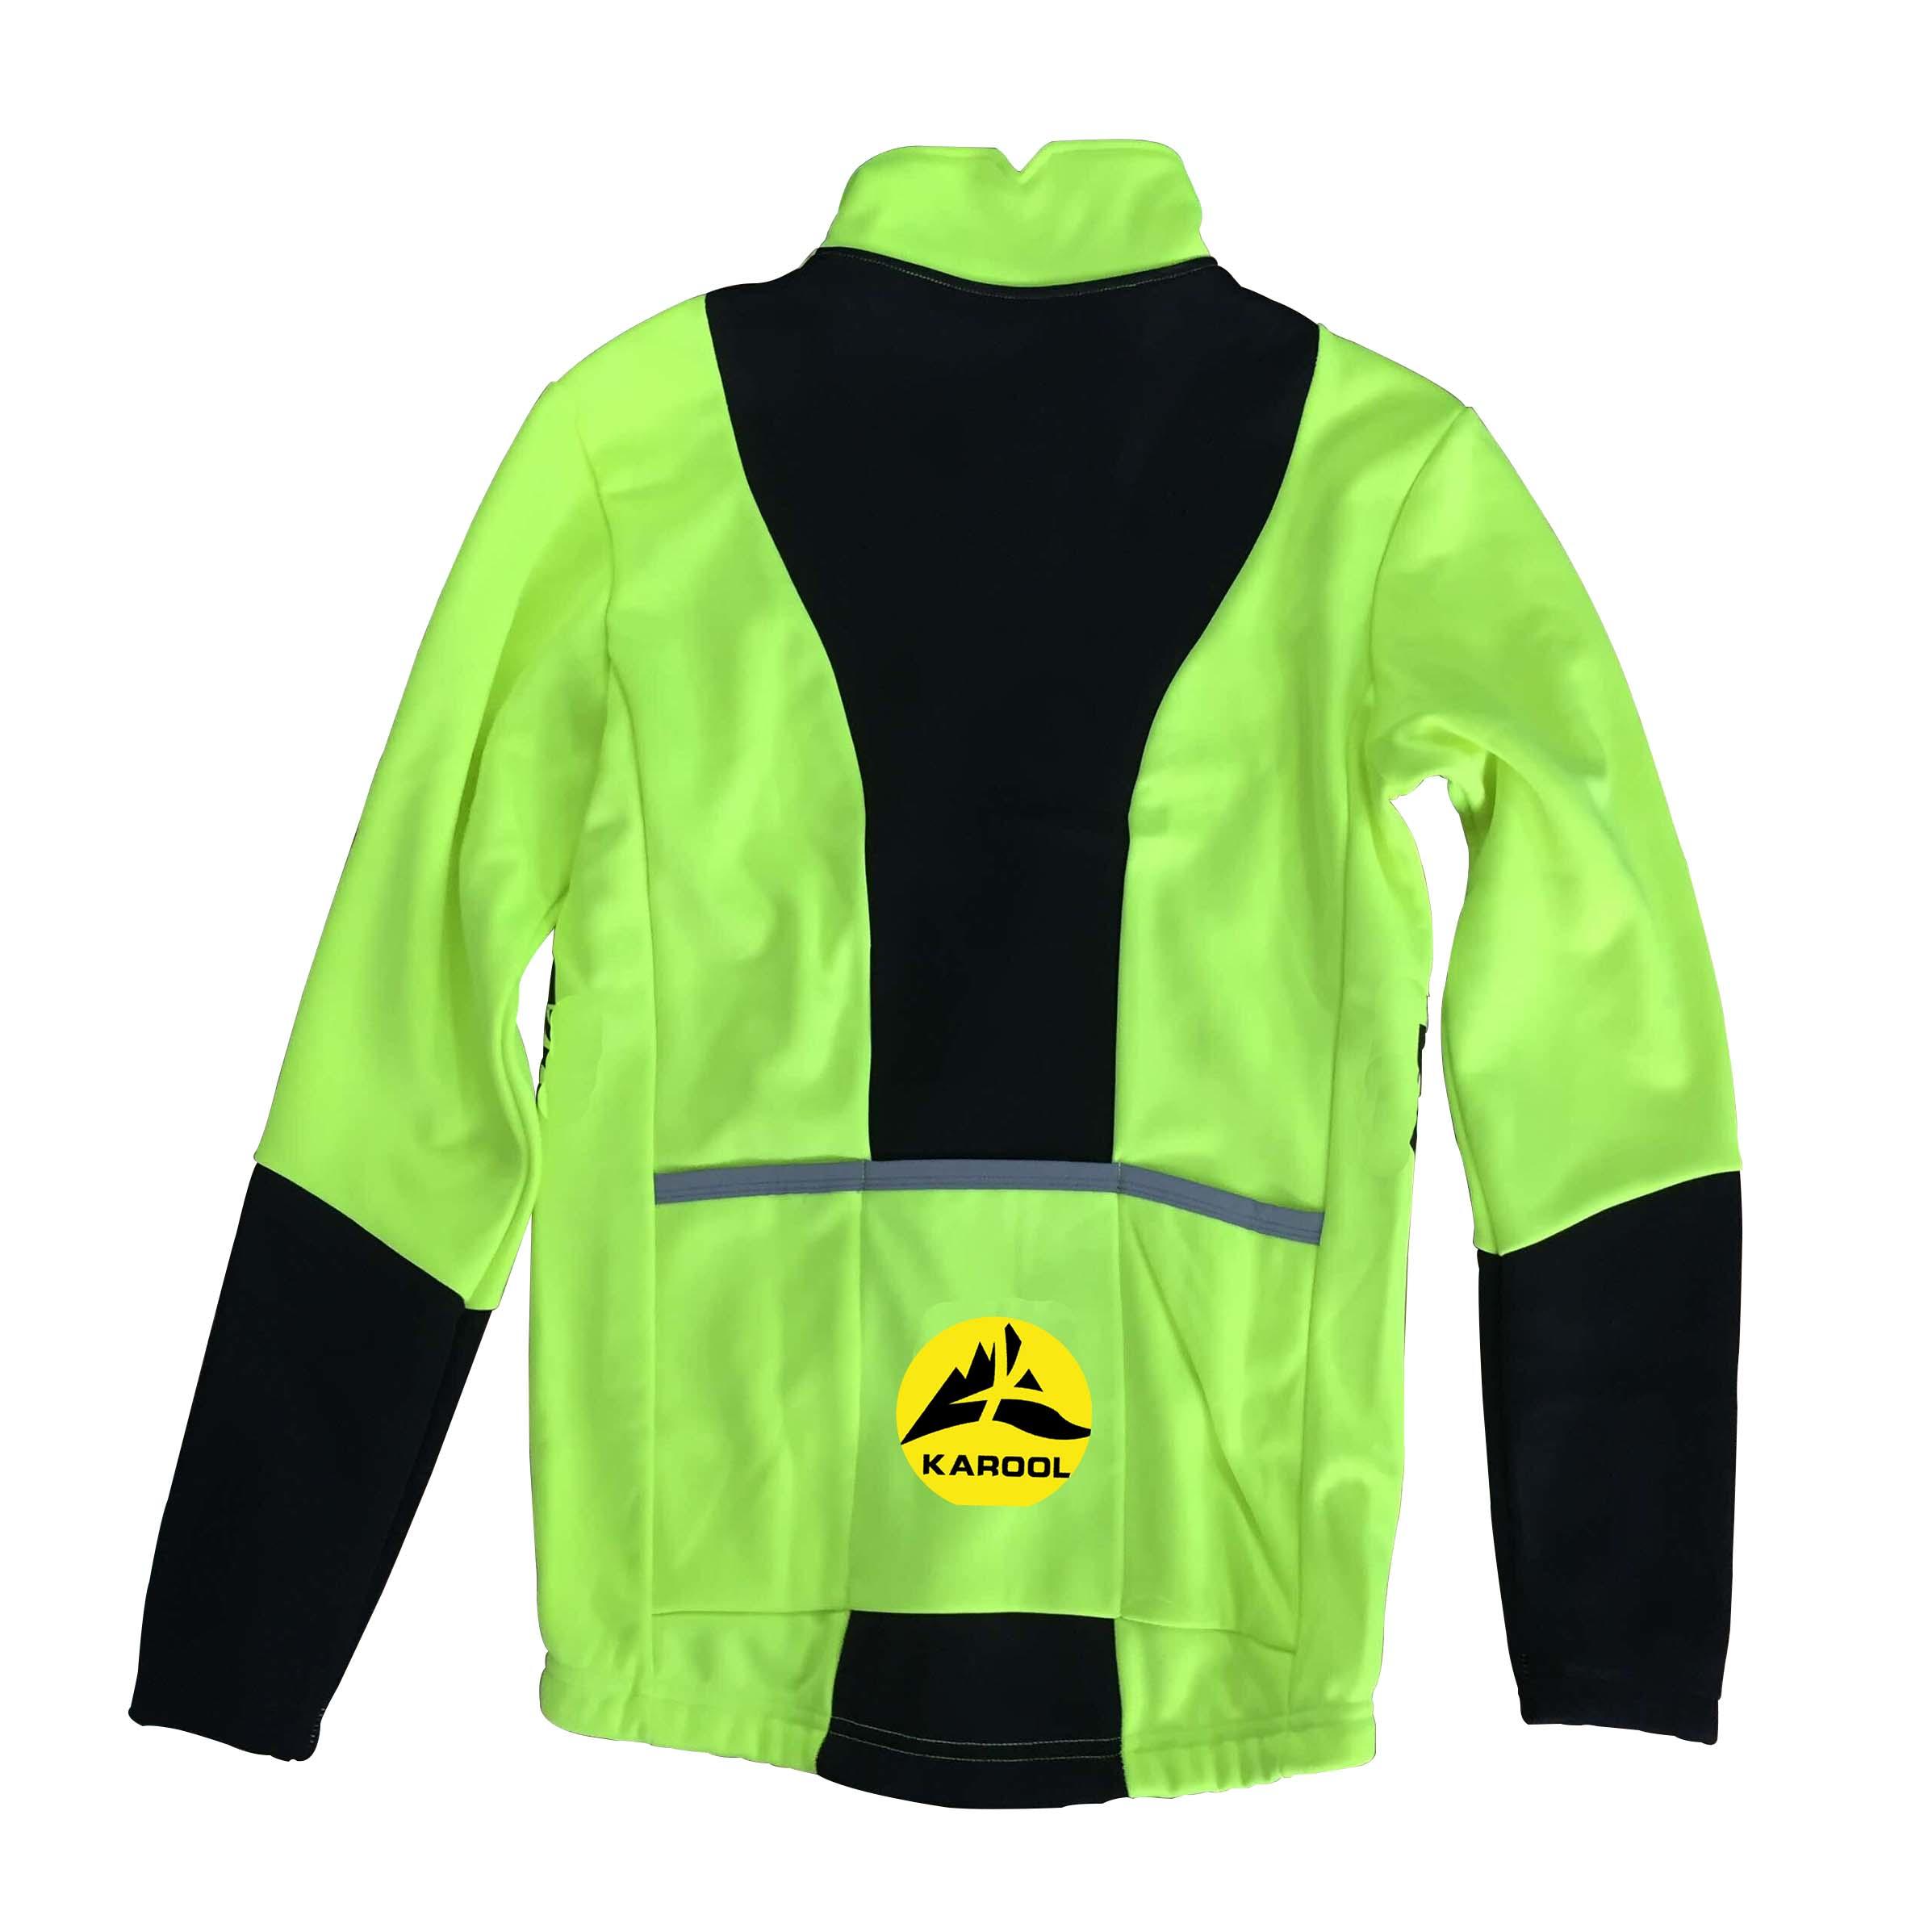 Karool bike riding jackets with good price for children-2